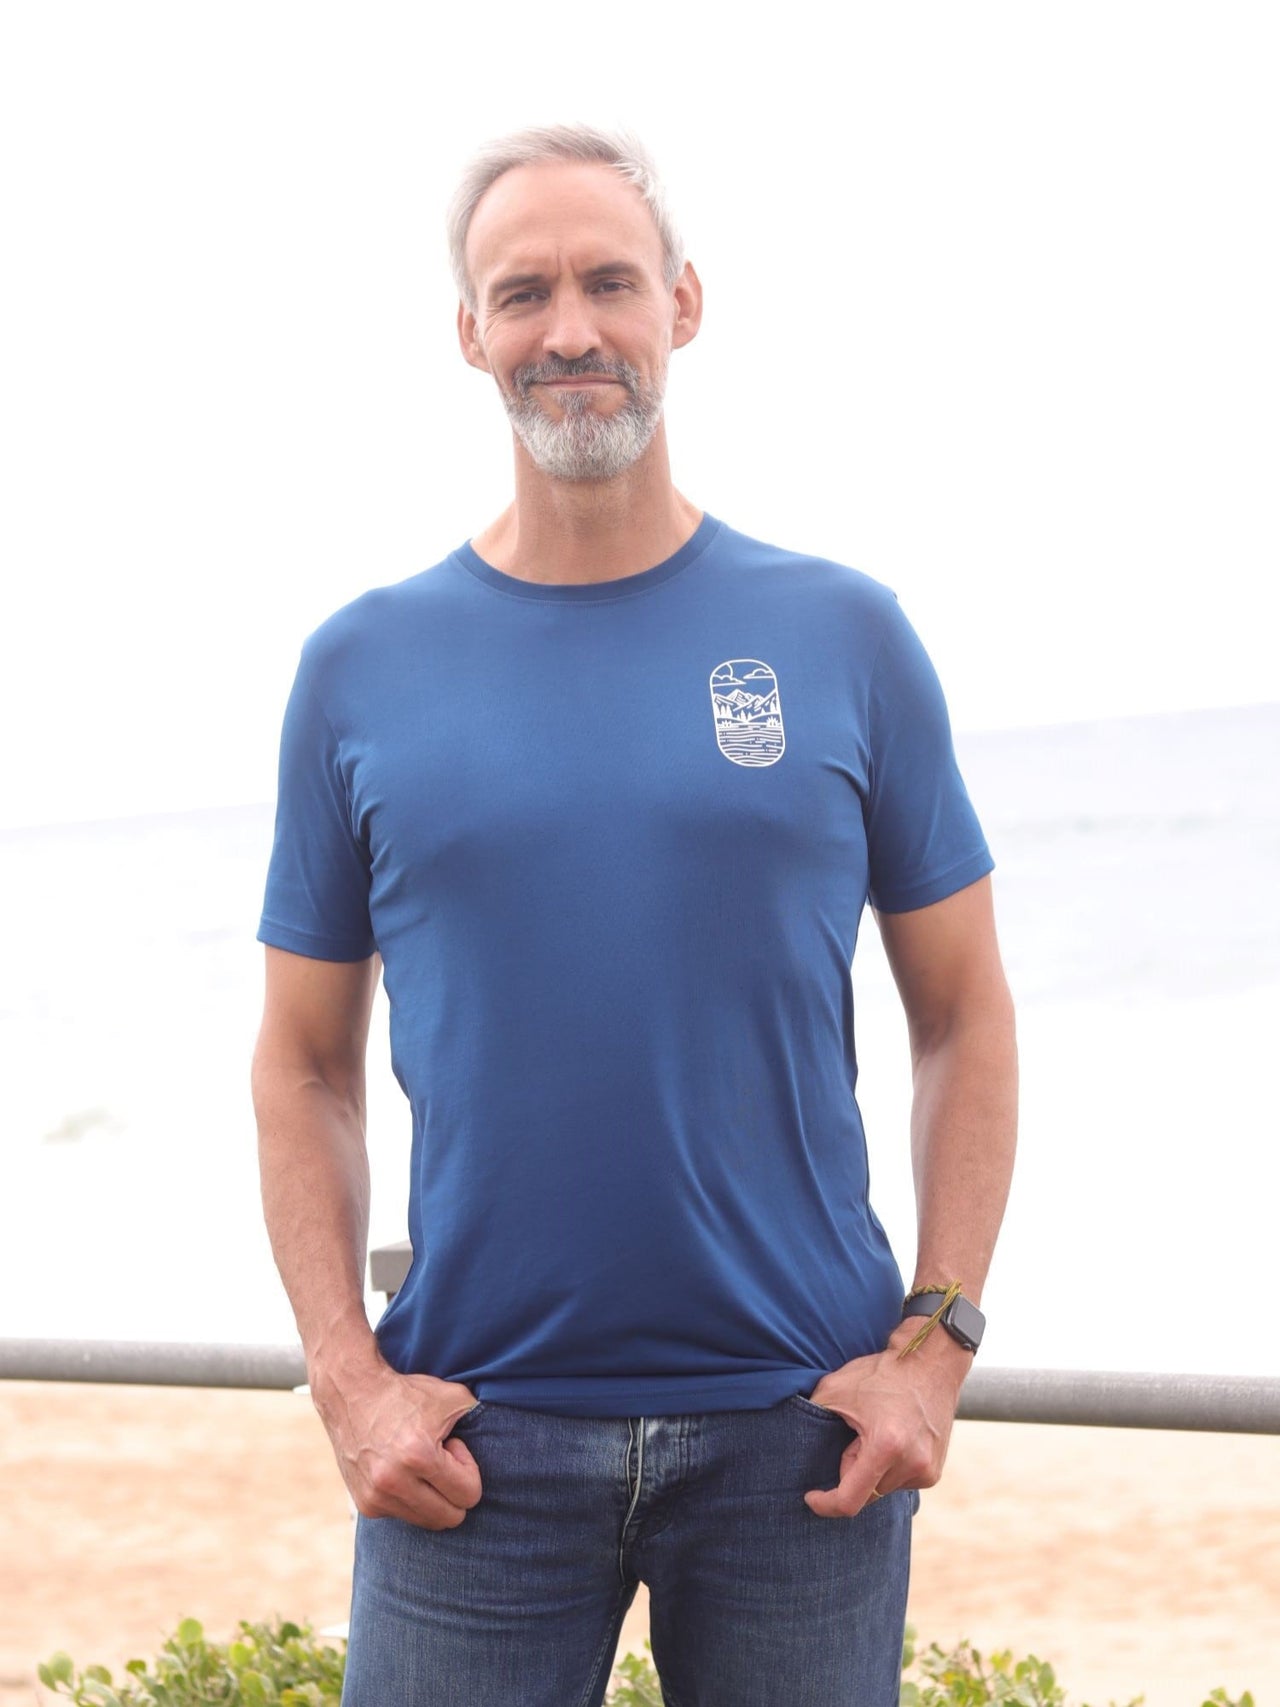 An upper body shot of a tall slim guy in an L tall graphic t-shirt with a lake design, hands in pockets.